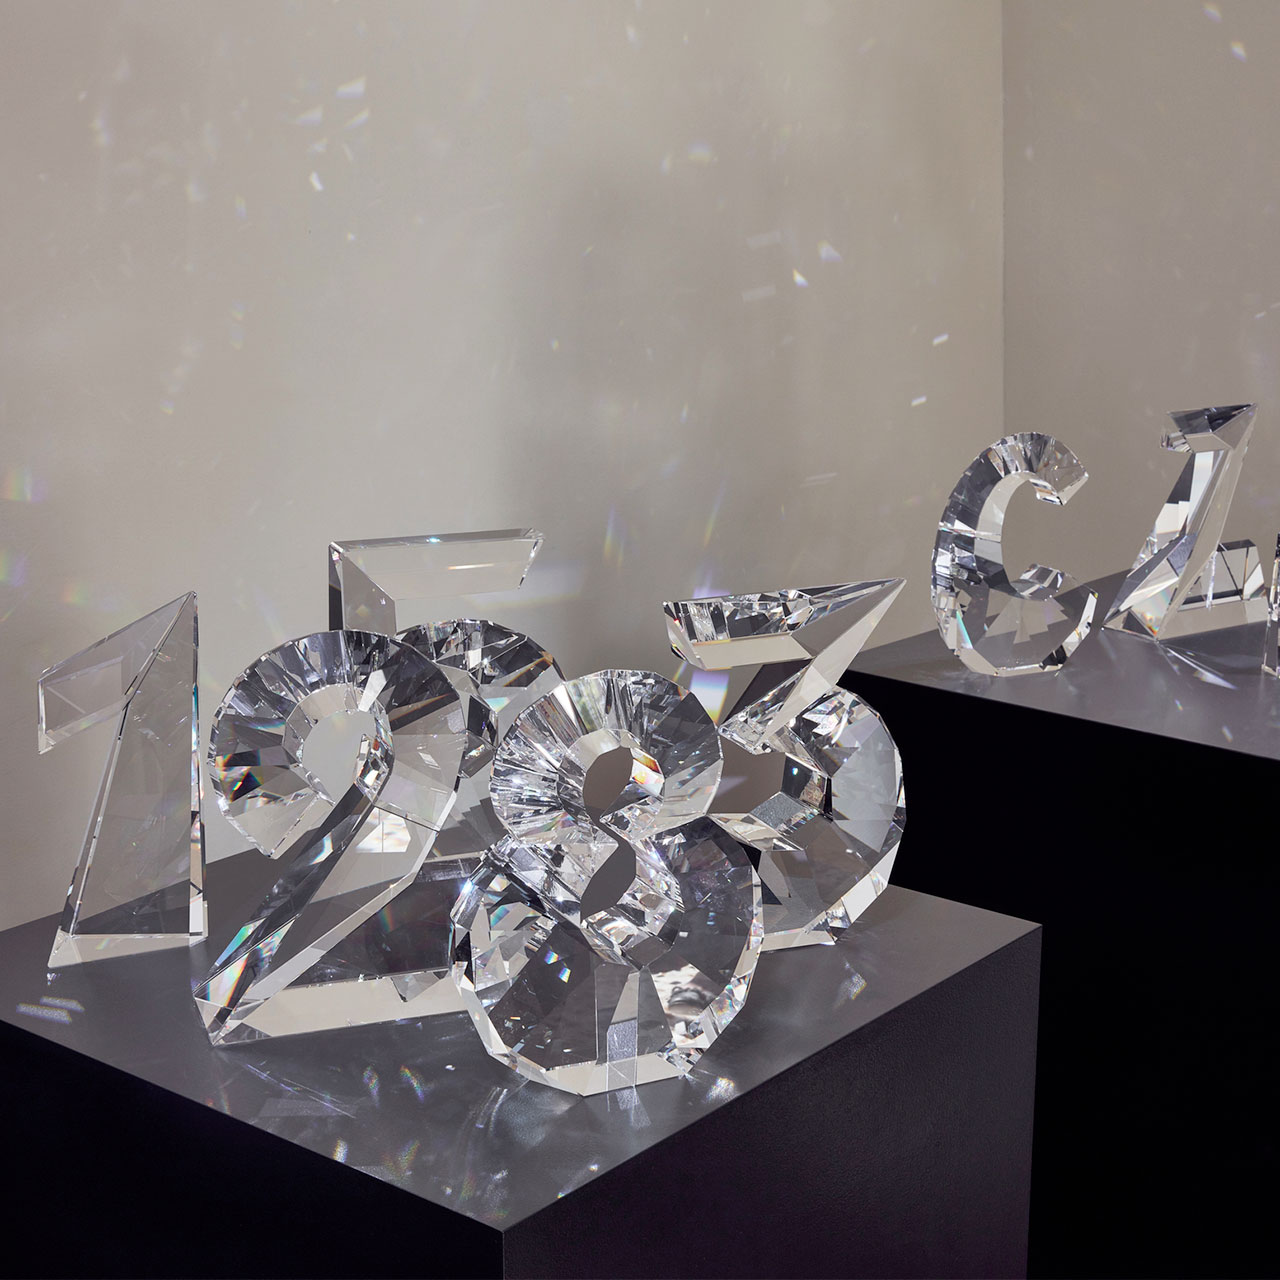 MDW16: Swarovski’s Partners with Top Designers on New Luxury Home Collection